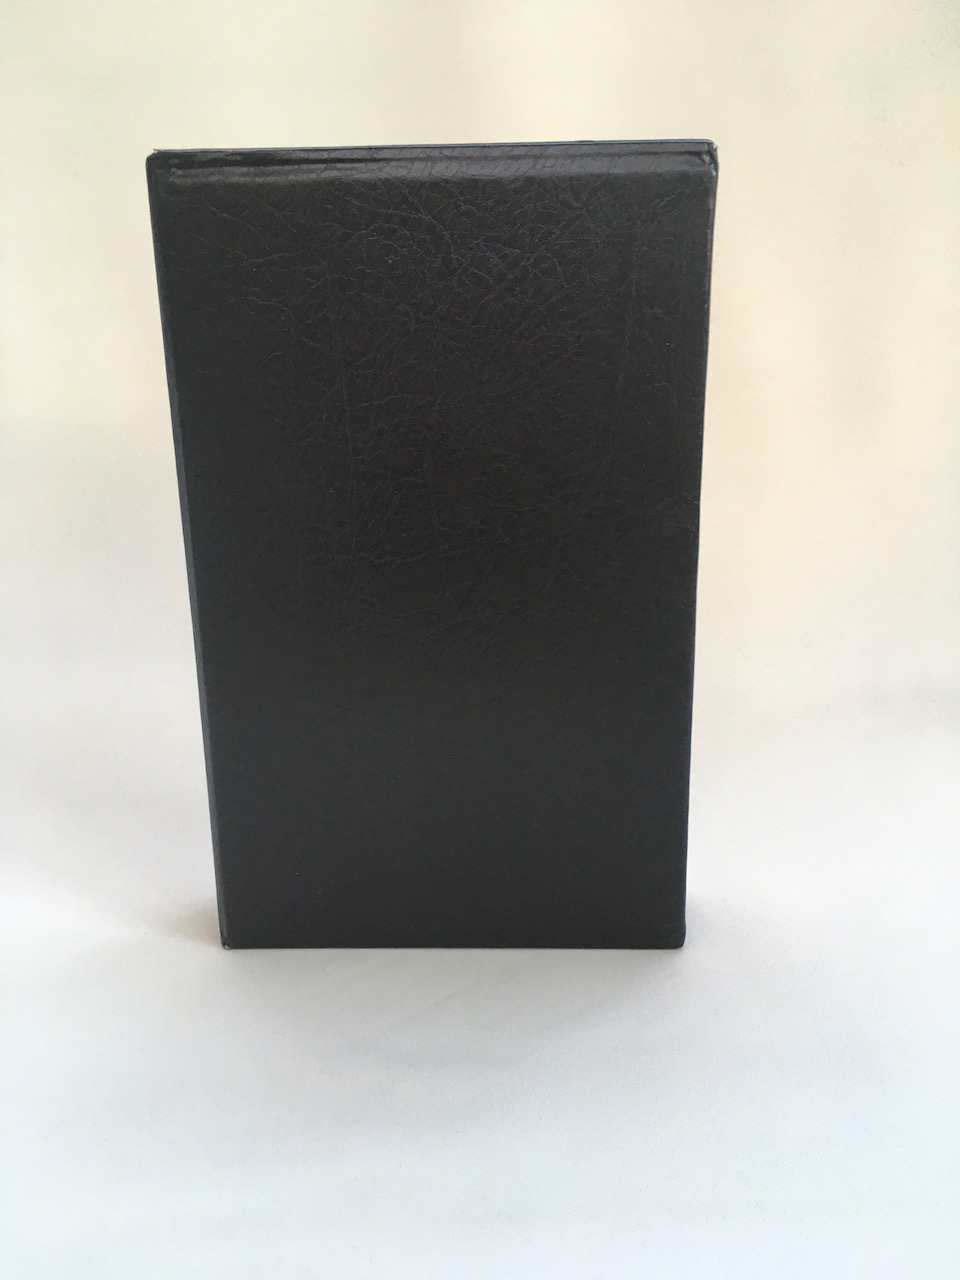 
Black Limited De Luxe edition of the Silmarillion 2002 7